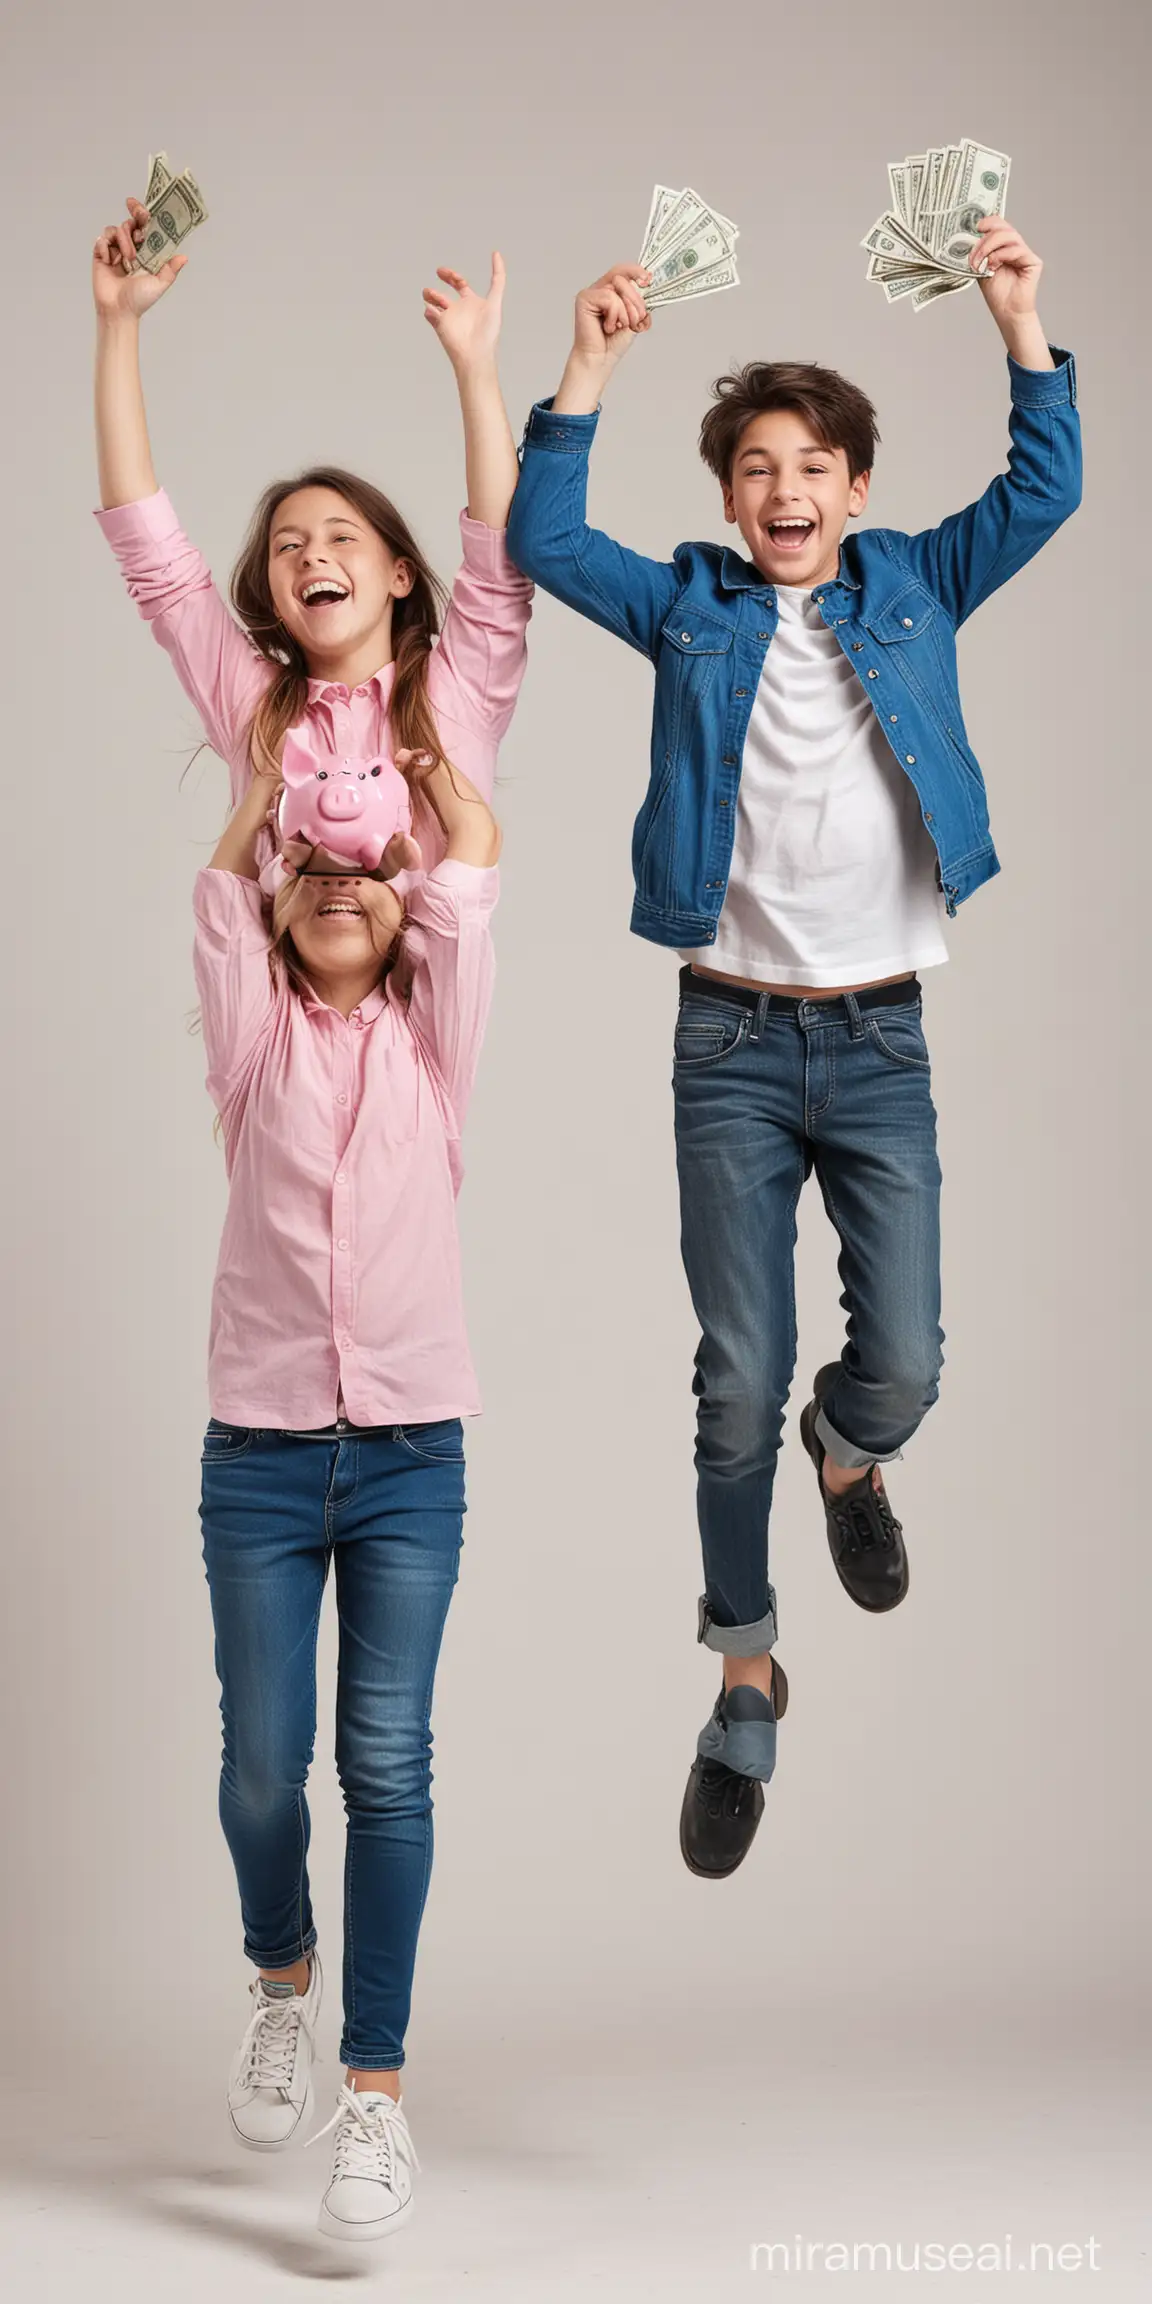 teenager a girl and a boy jumping happily  holding a piggy bank and another one is holding money 
 in plain backgound